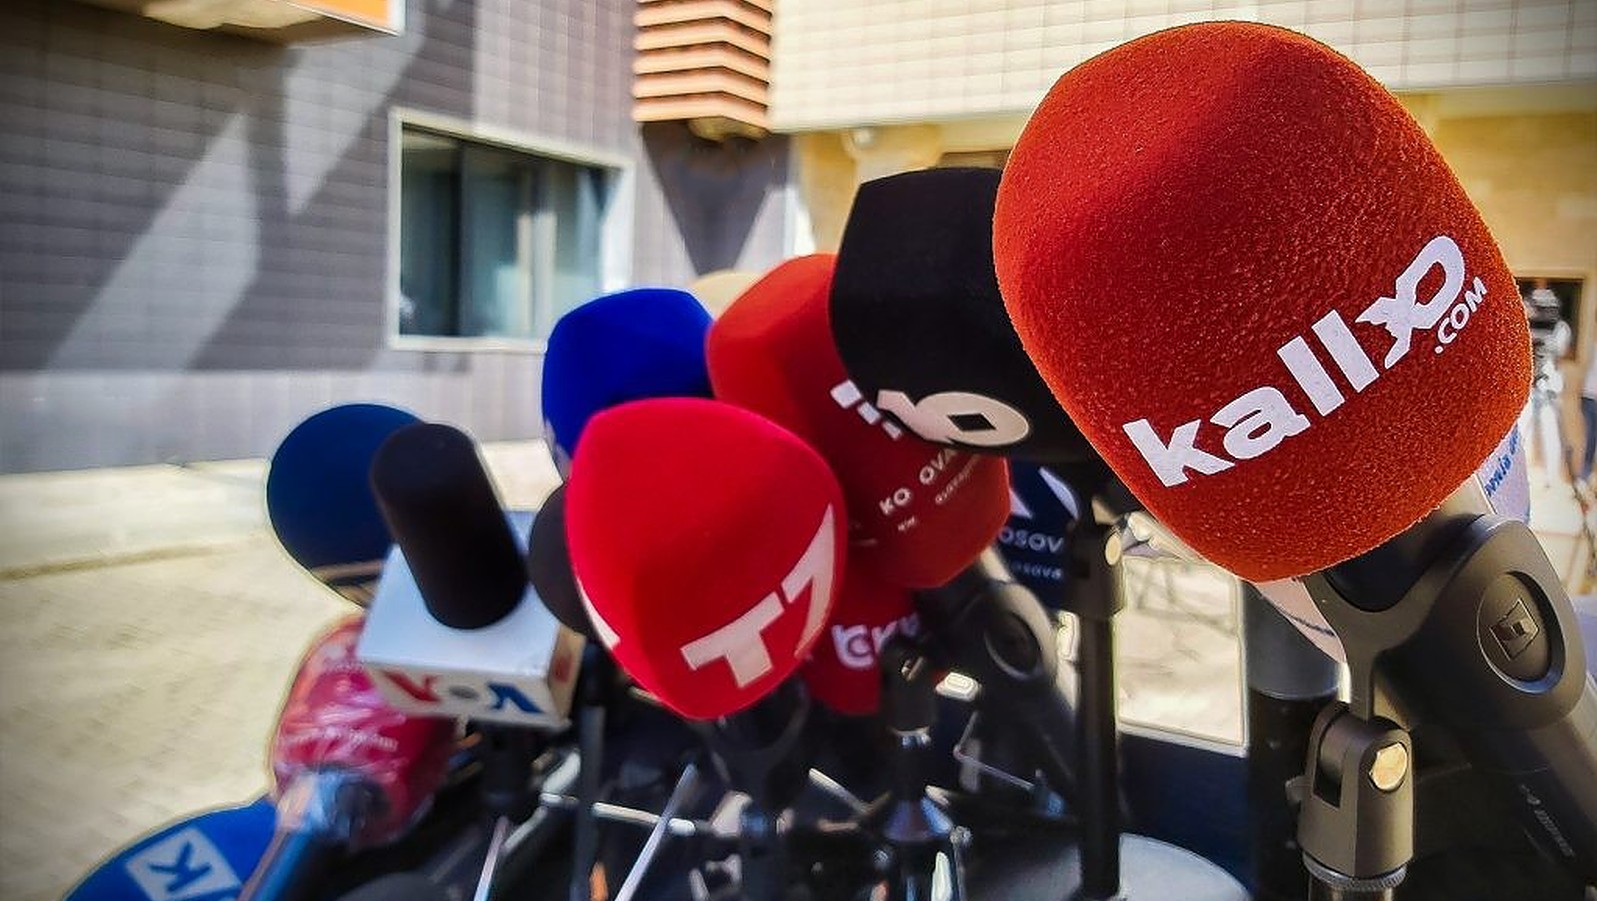 Kosovo Govt Condemned for Suspending Broadcaster’s Business Certificate